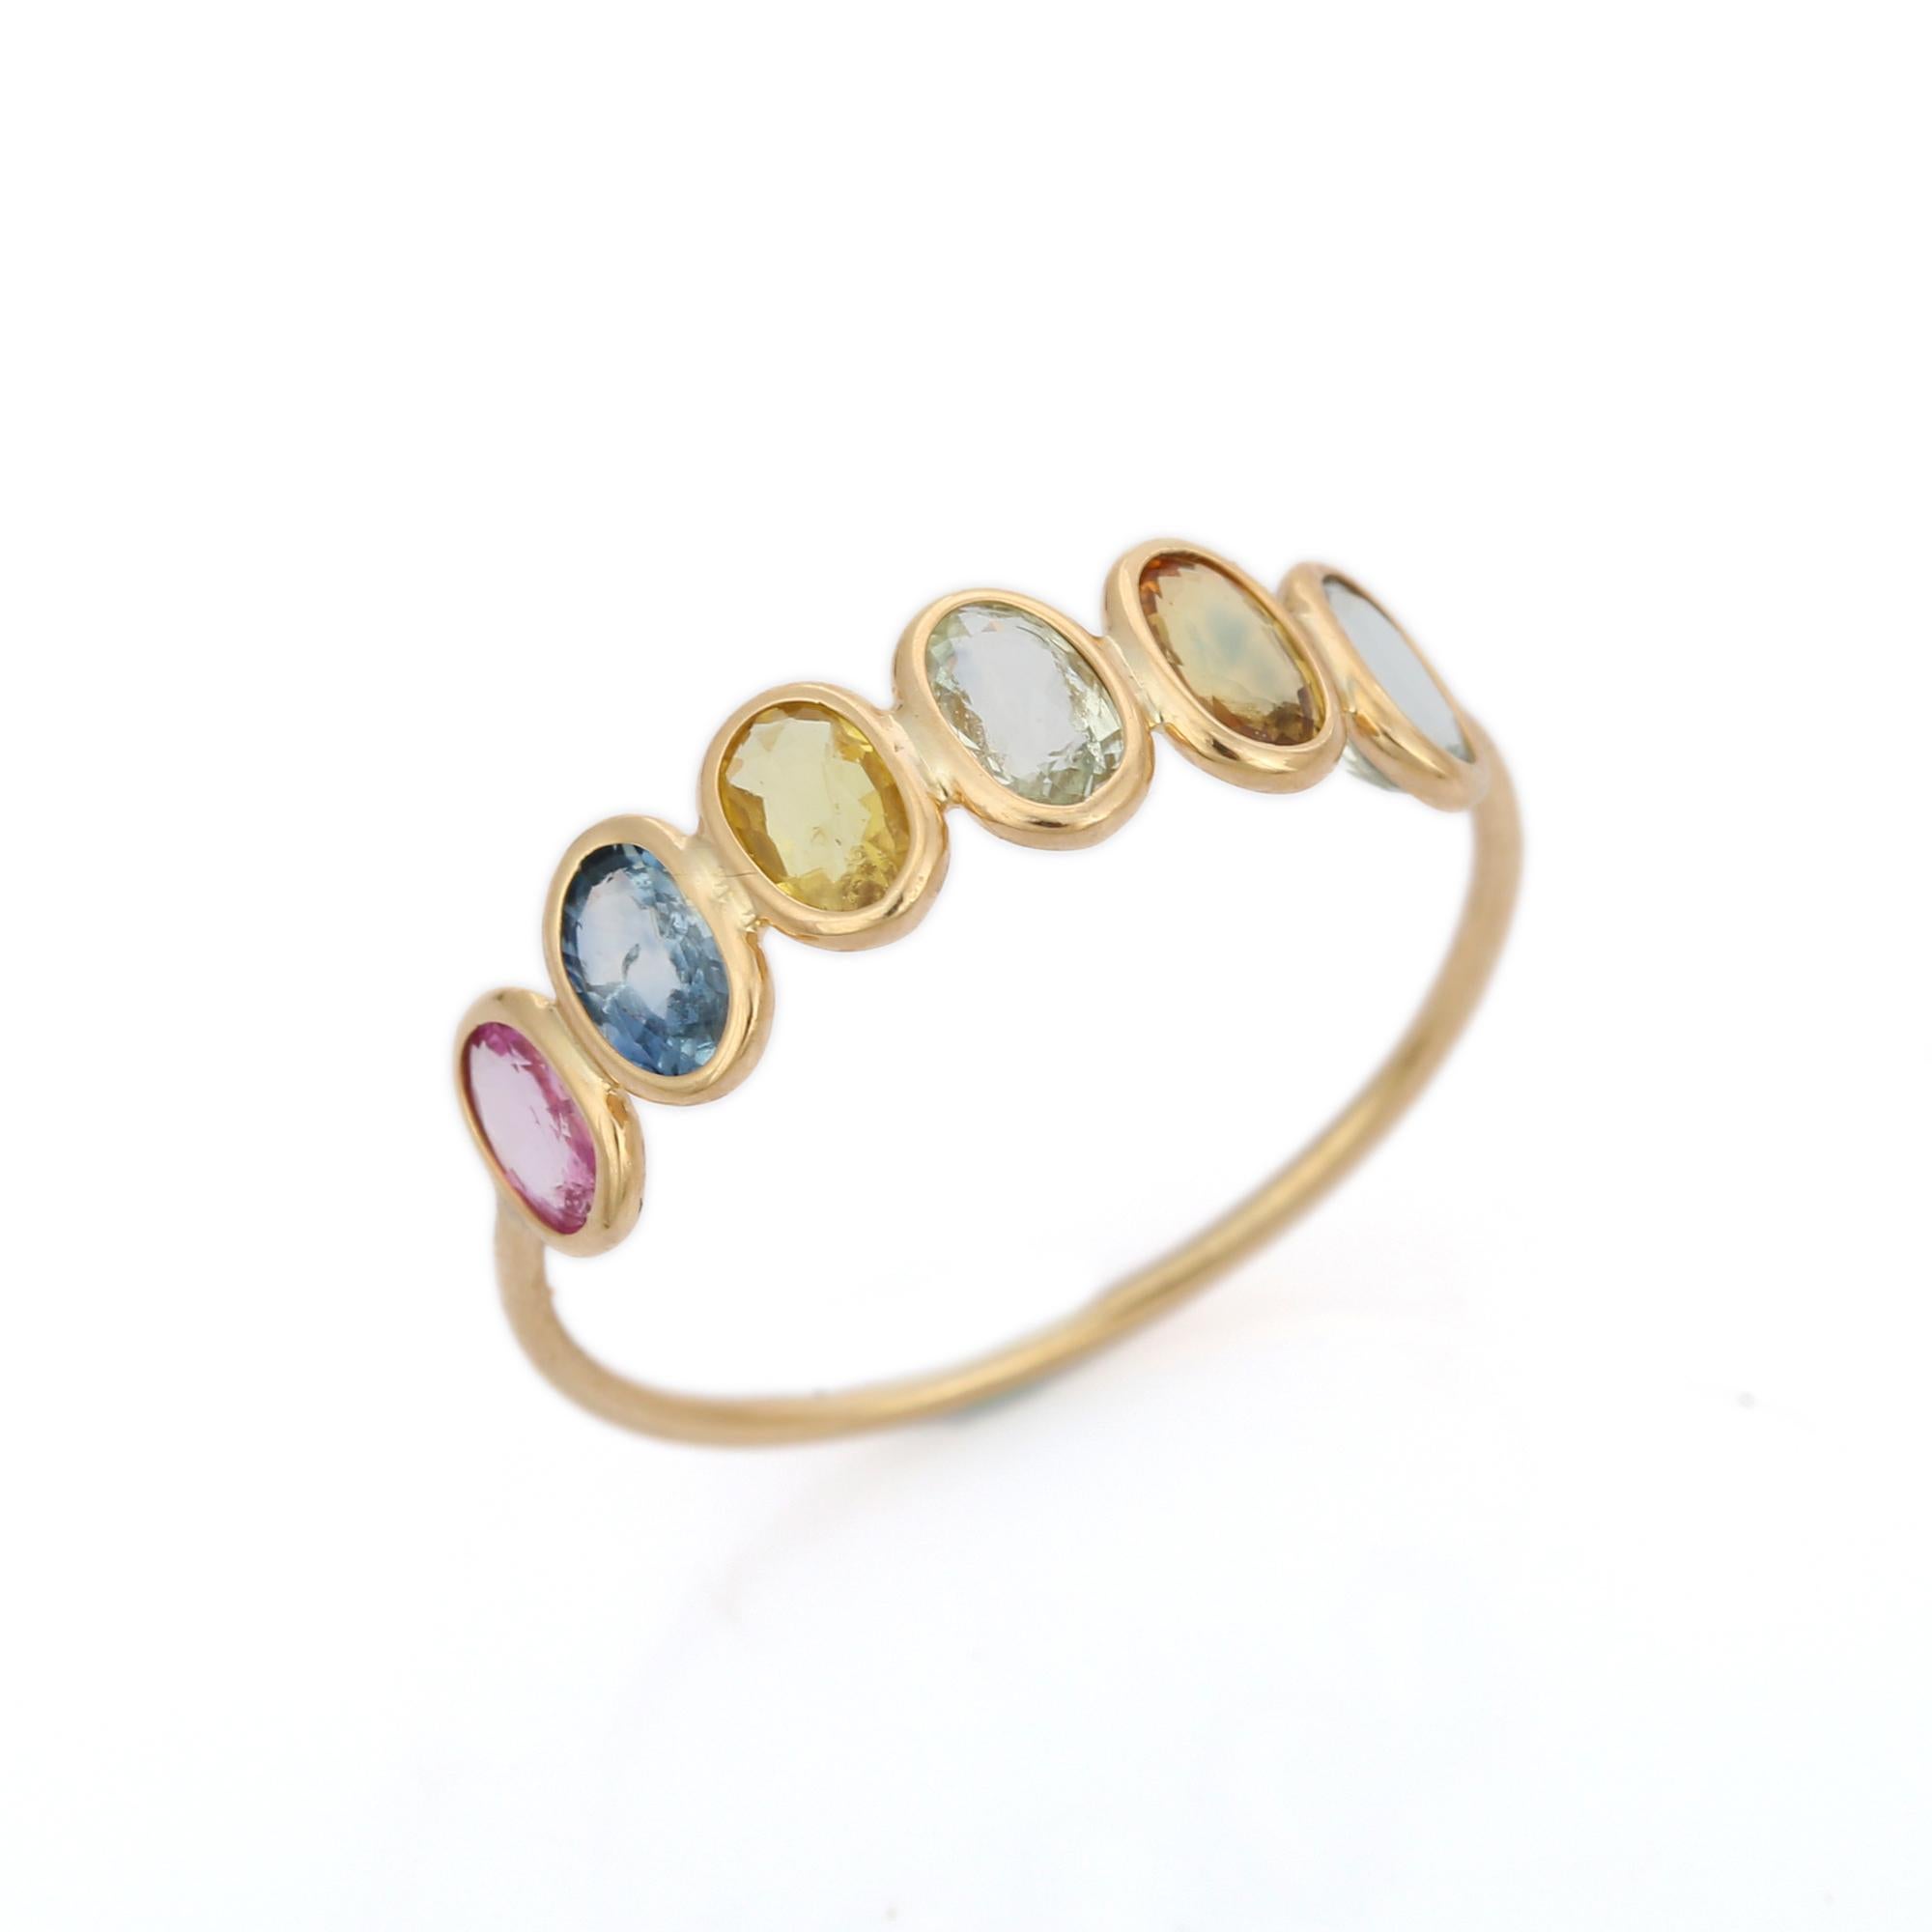 For Sale:  1.69 Carat Multi Sapphire Half Eternity Band Ring in 18K Yellow Gold  7